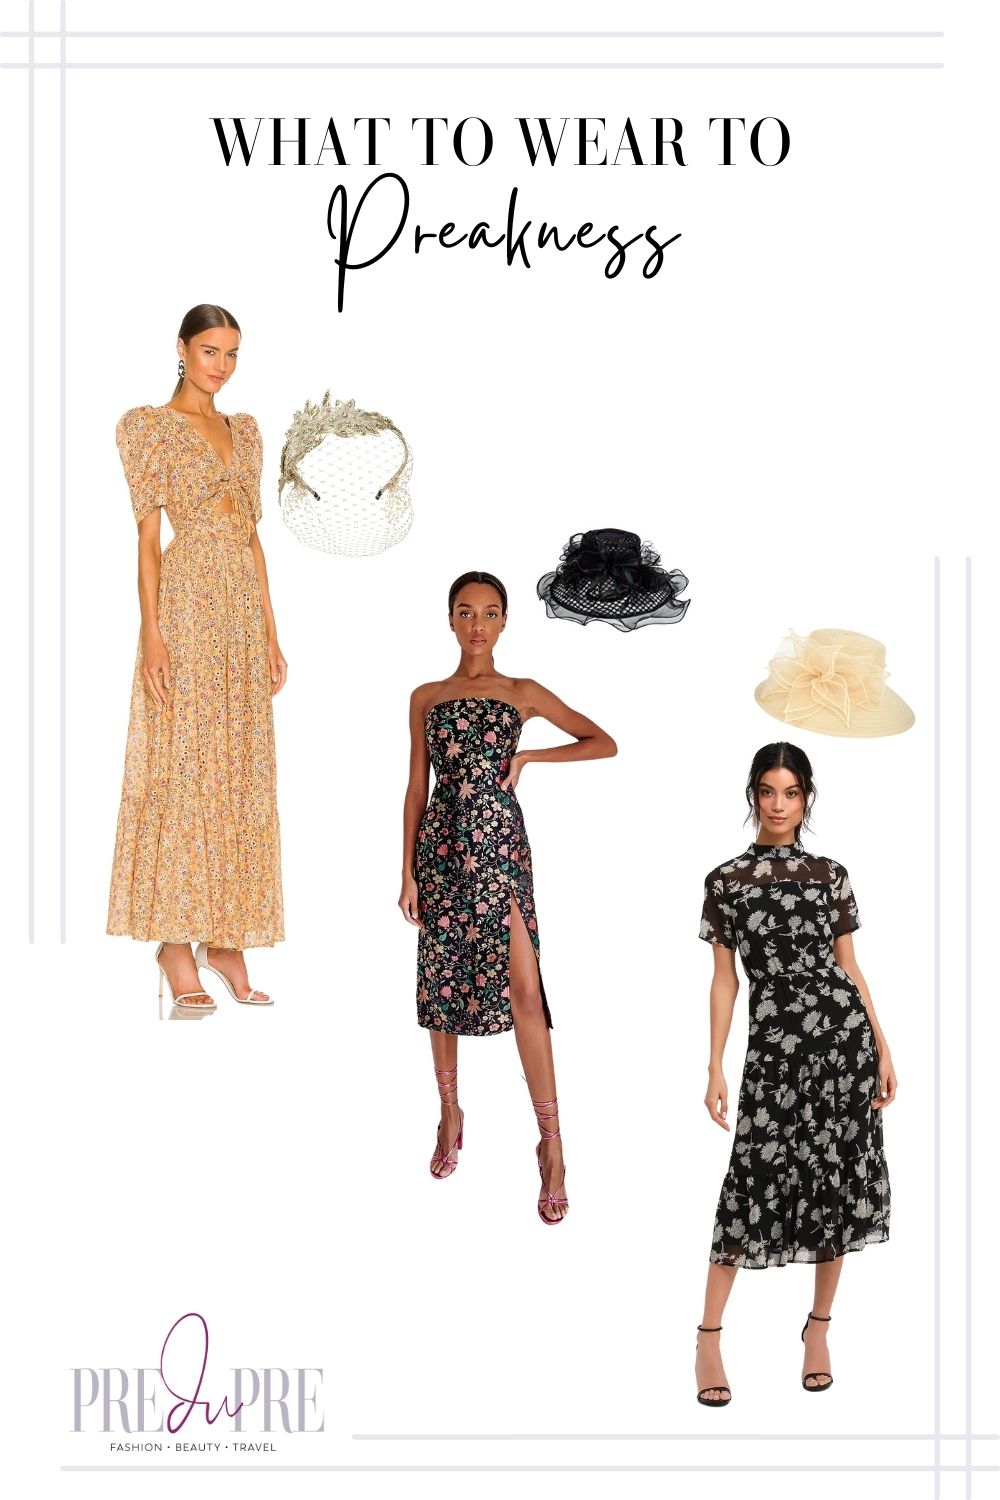 what to wear for Preakness. Dresses and fascinators for horse race